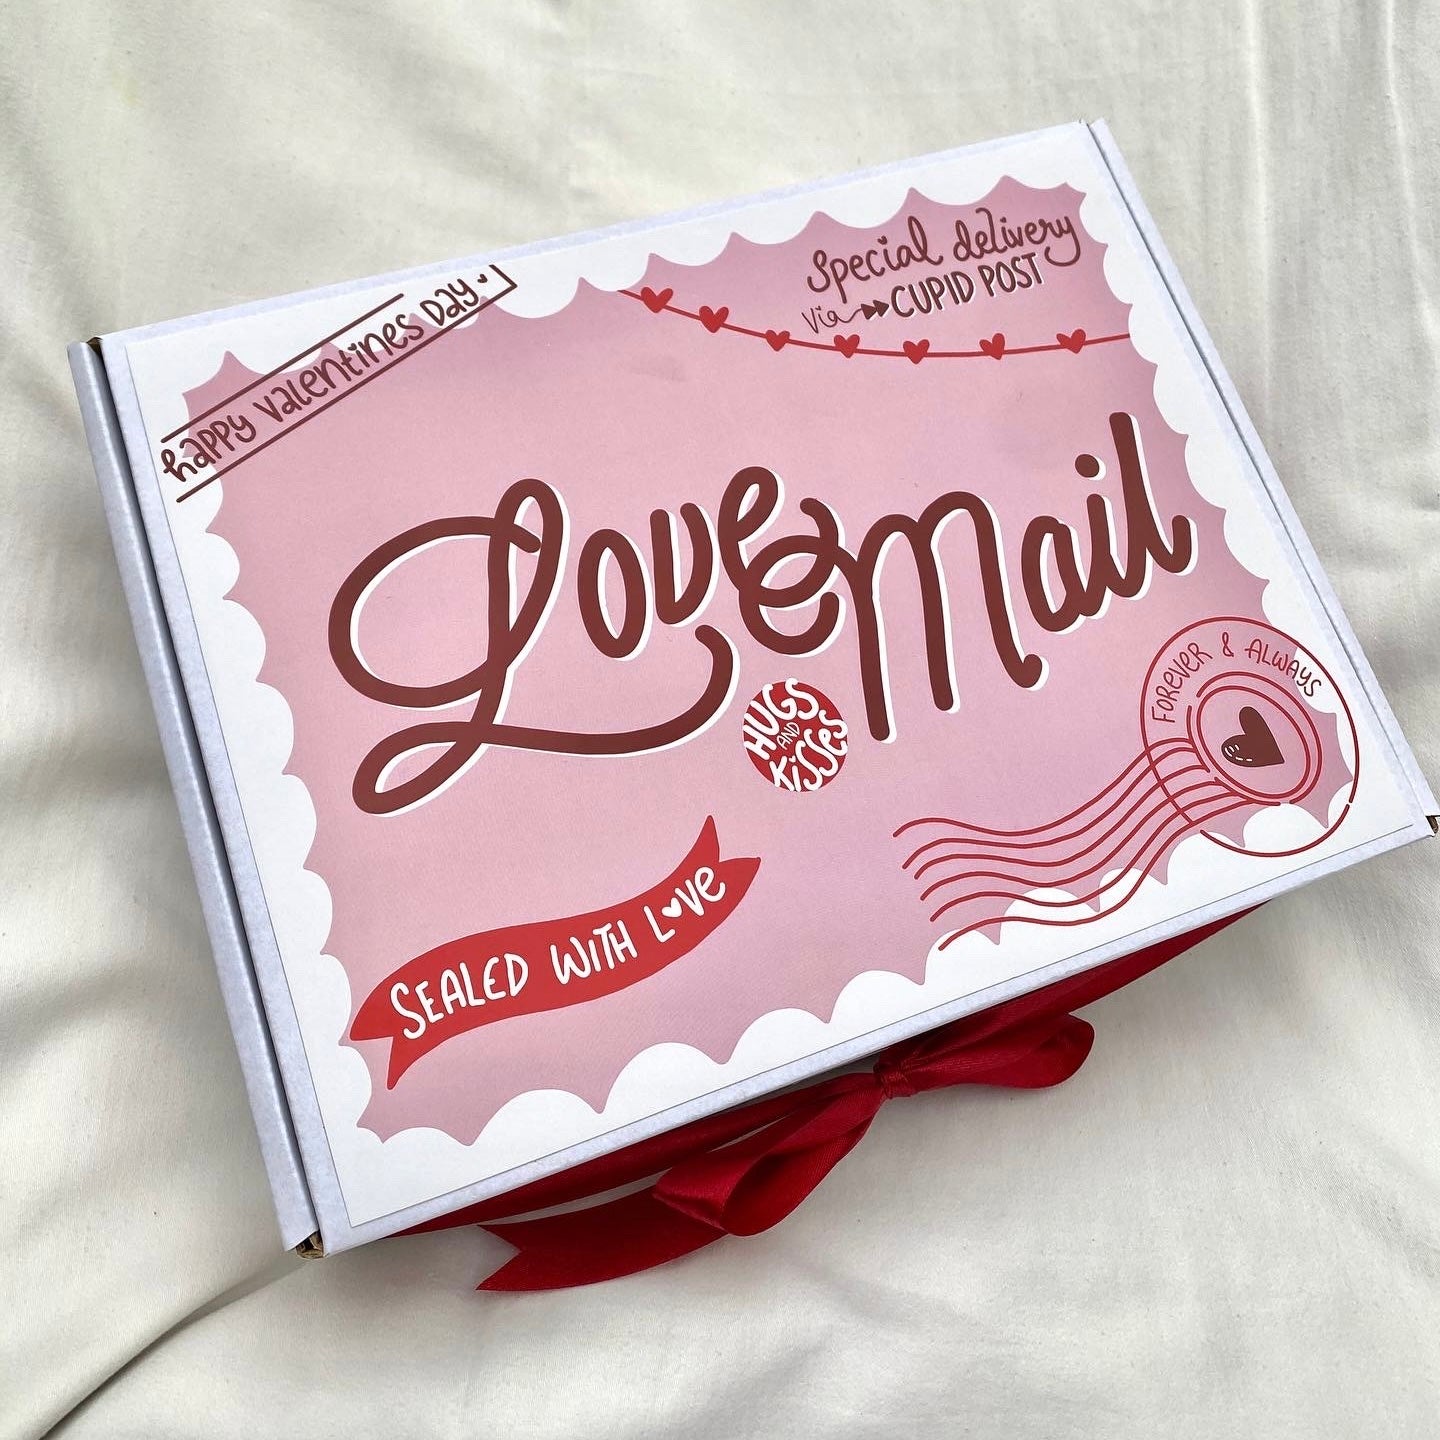 Deal 8 (Box, Love Coupons, Two Valentine Cards)